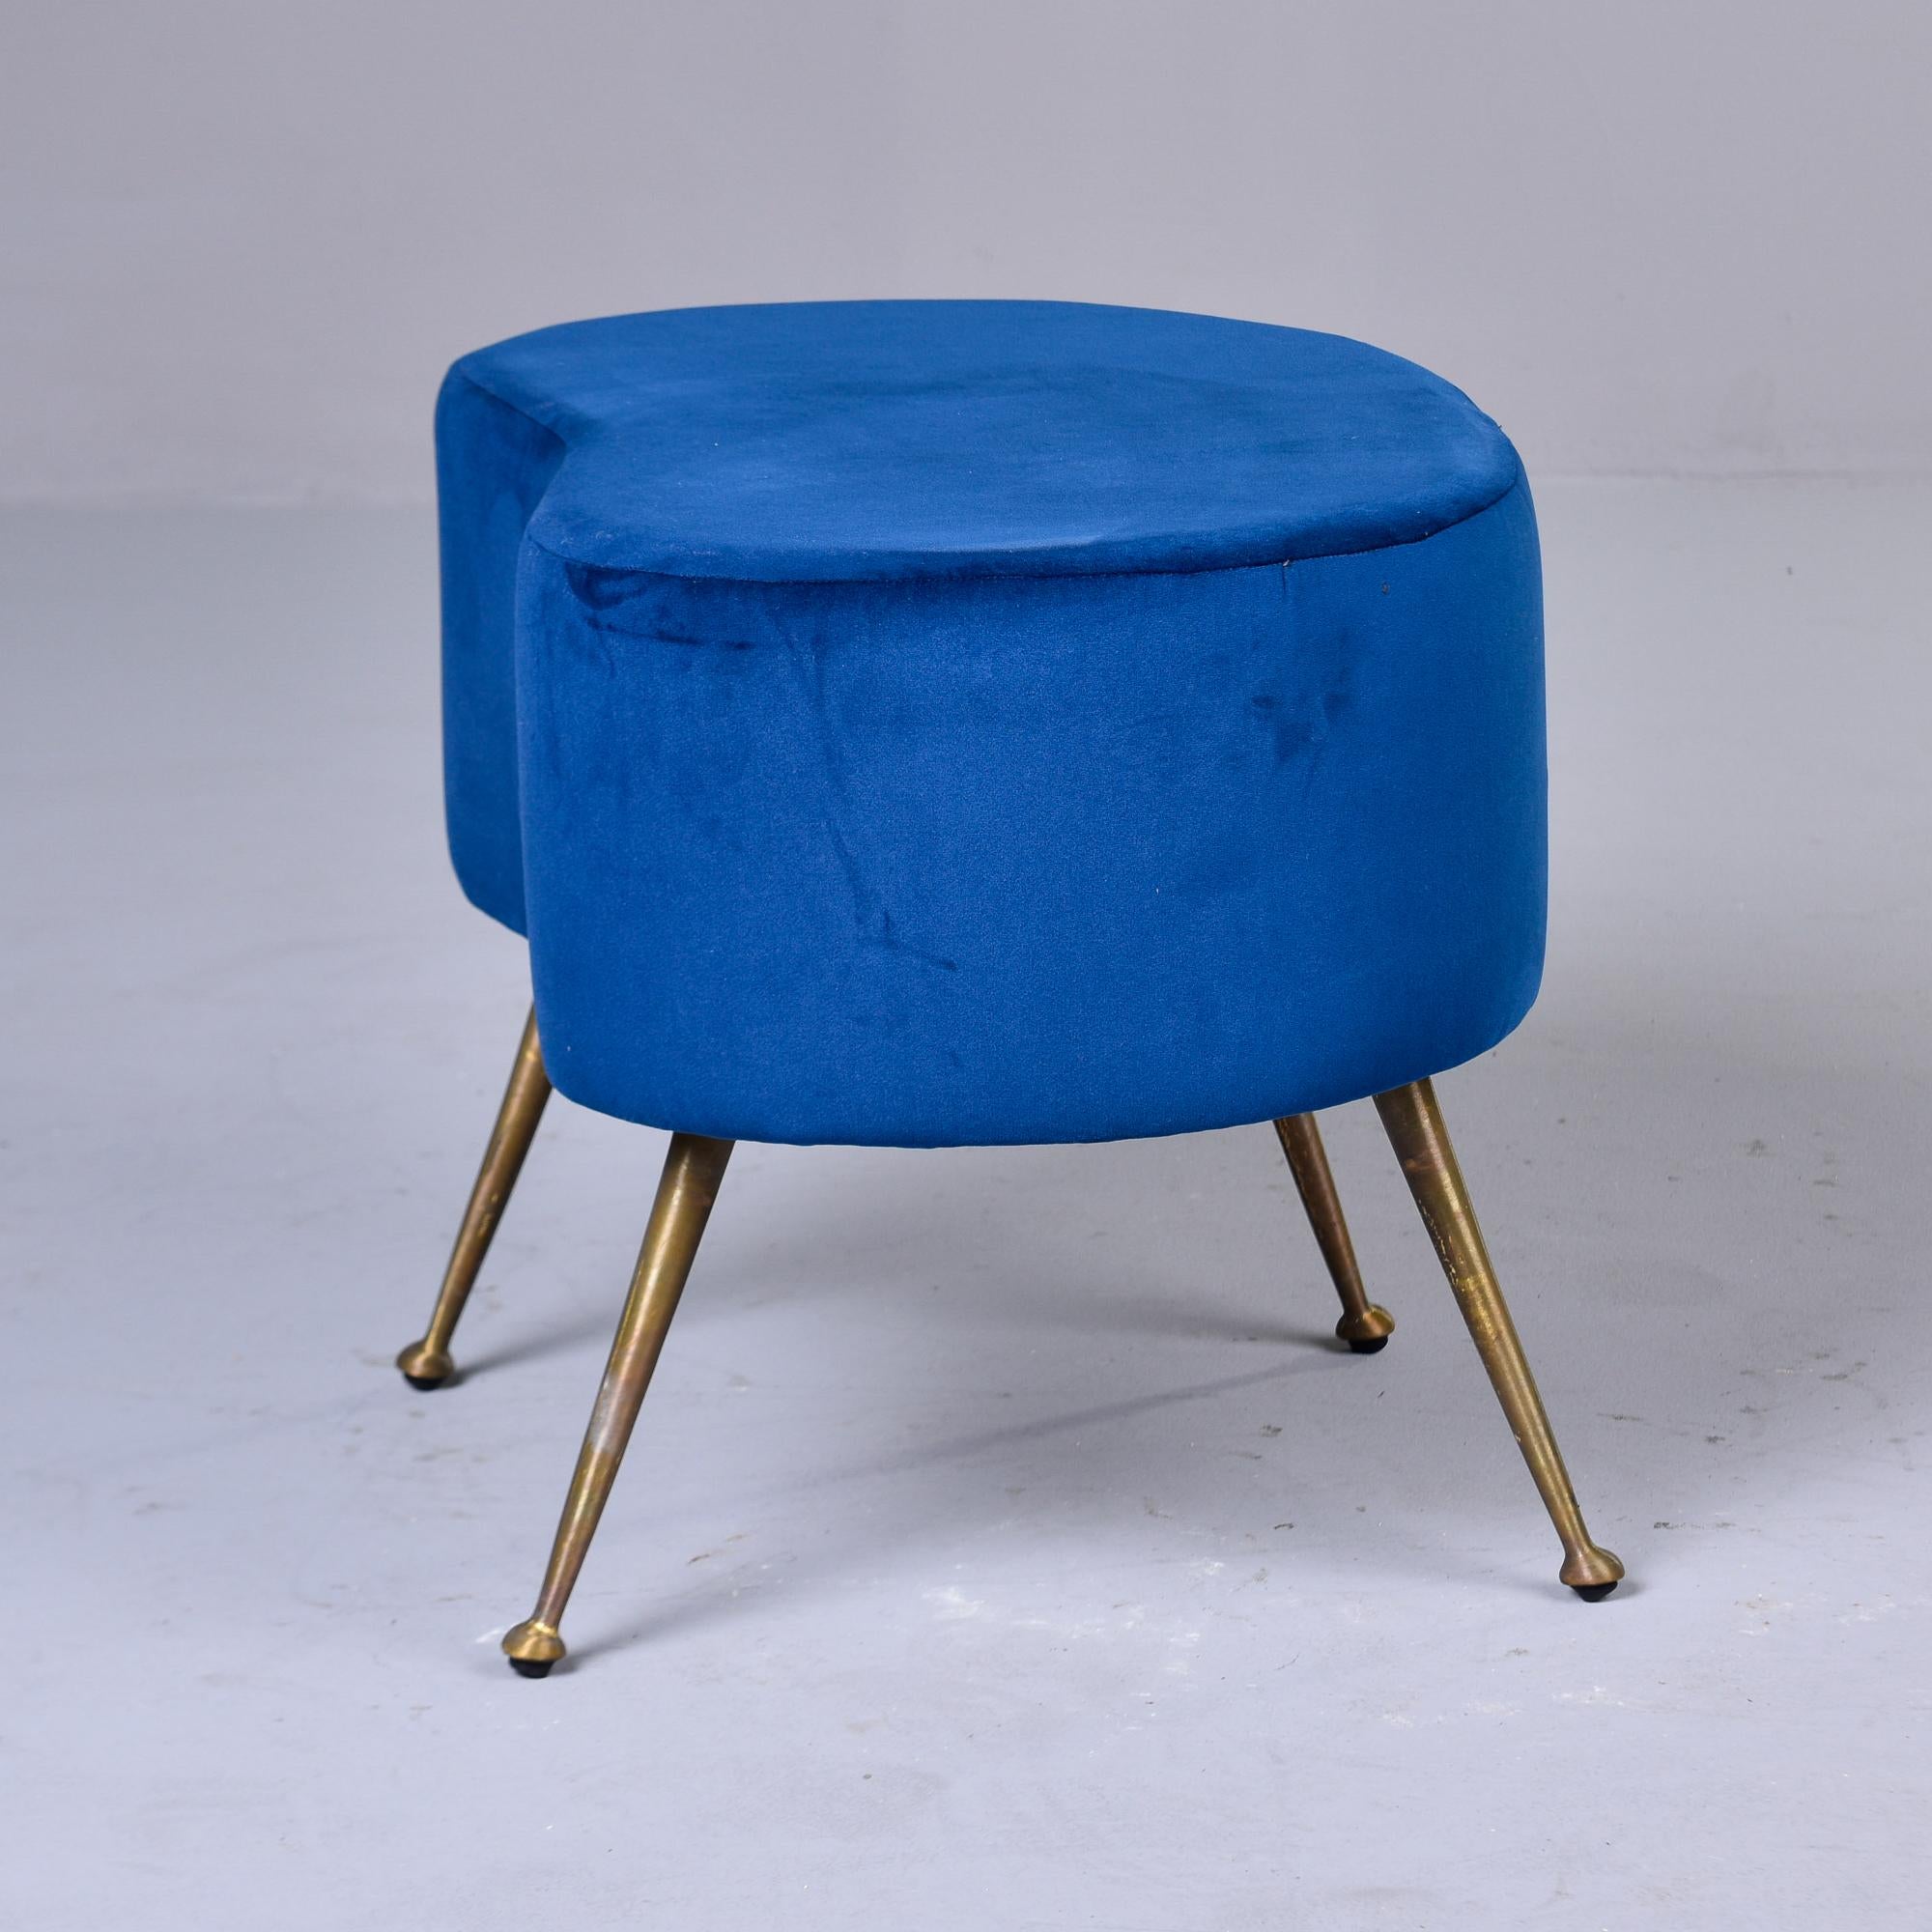 20th Century Italian Mid Century Blue Kidney Shaped Stool with Brass Legs For Sale